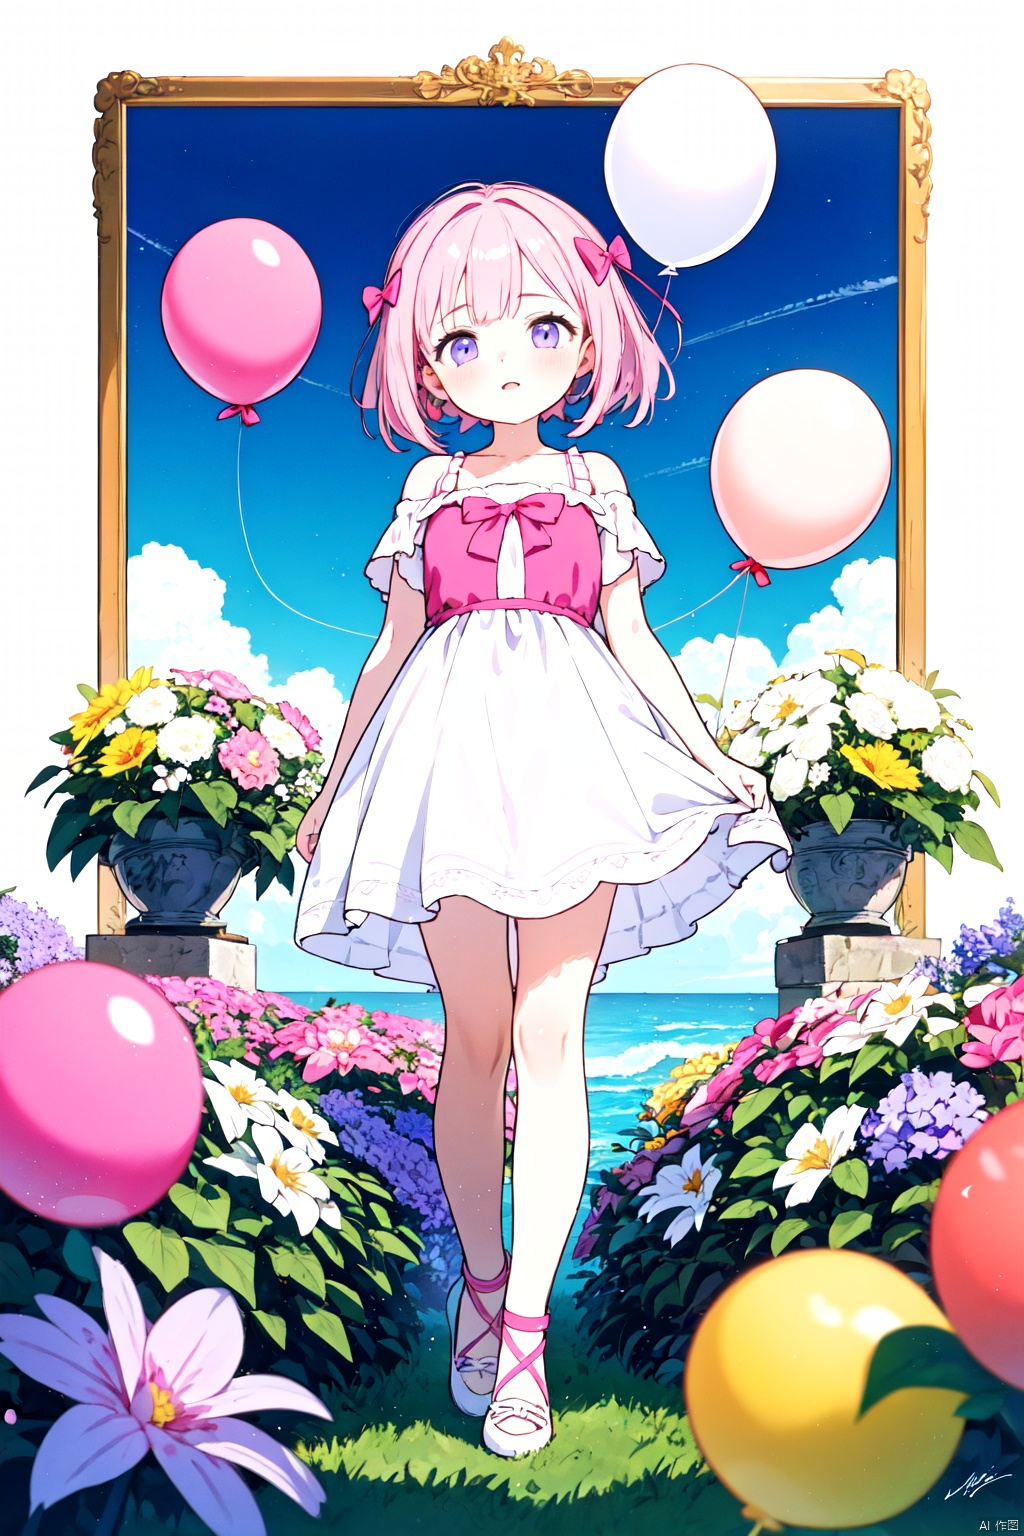 A girl in a pink sundress, with long flowing hair adorned with a pink bow hair accessory, playfully holding a pink balloon, standing amidst a dreamy sea of flowers. The background exhibits a soft gradient, transitioning from light pink to pale purple, resembling a watercolor painting from a dream. The scene is depicted with HDR, featuring ultra-fine painting quality, vivid colors, and sharp focus. The art style blends portraits and dreamy landscapes, highlighting the girl's lively and adorable nature. The lighting should capture the enchanting ambiance of a magical garden bathed in soft, ethereal light.